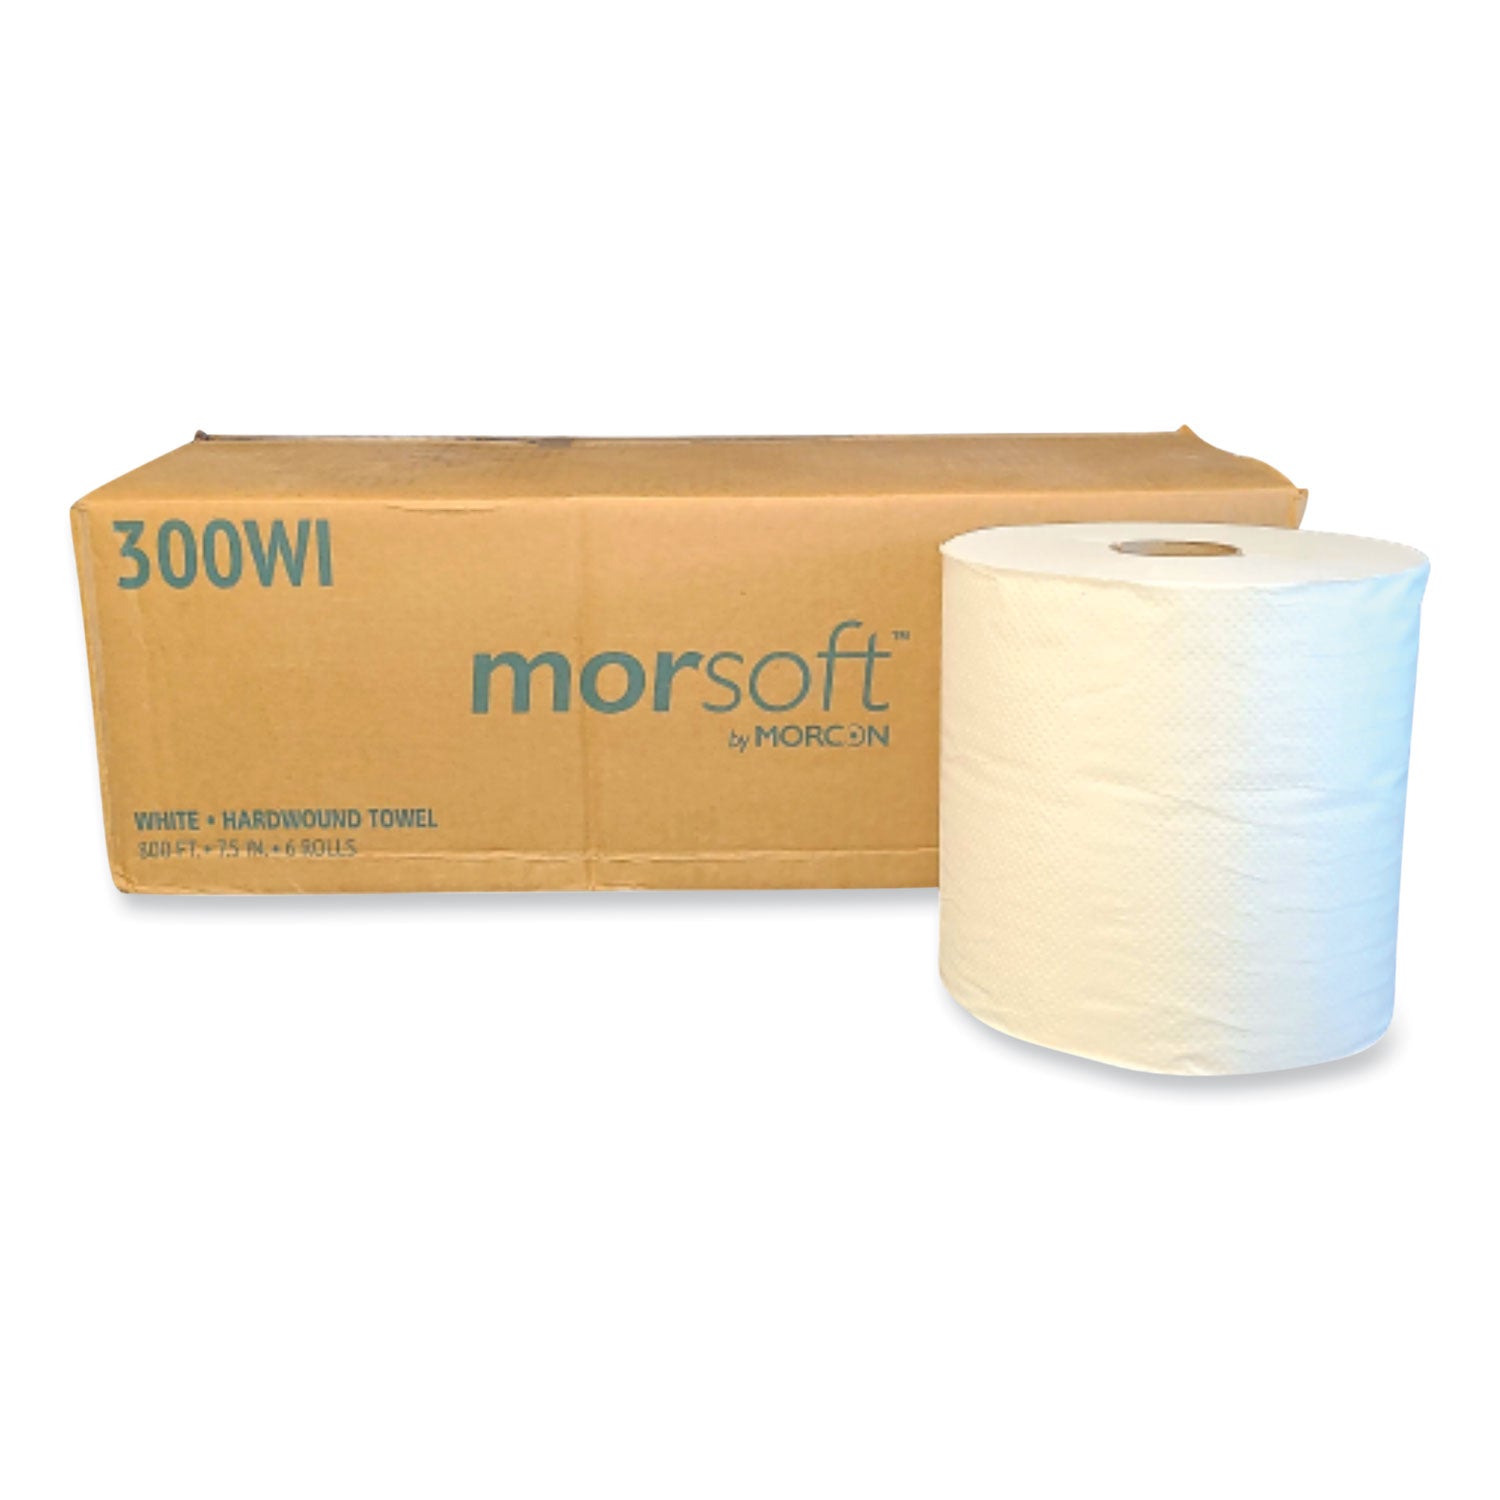 morsoft-controlled-towels-i-notch-1-ply-75-x-800-ft-white-6-rolls-carton_mor300wi - 4